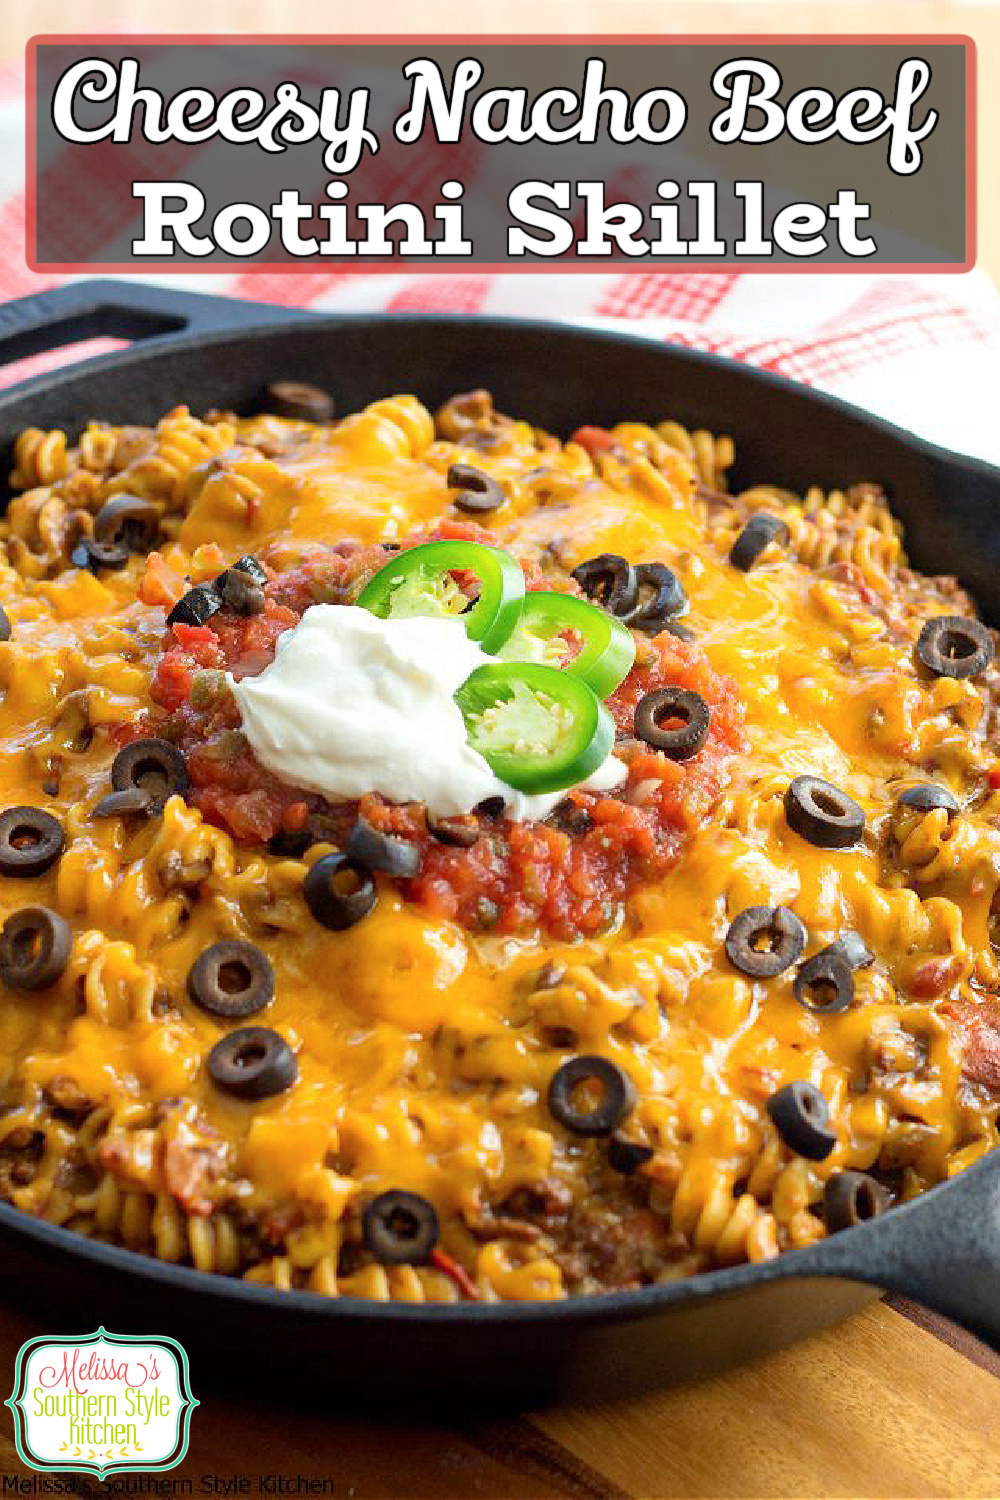 The family will love this nacho flavored pasta skillet for dinner any night of the week #nachos #nachobeef #cheesynachos #rotini #pasta #nachopastarecipes #dinner #easygroundbeefrecipes #beef #dinnerideas #tacotuewsday #southernfood #southernrecipes #castironcooking